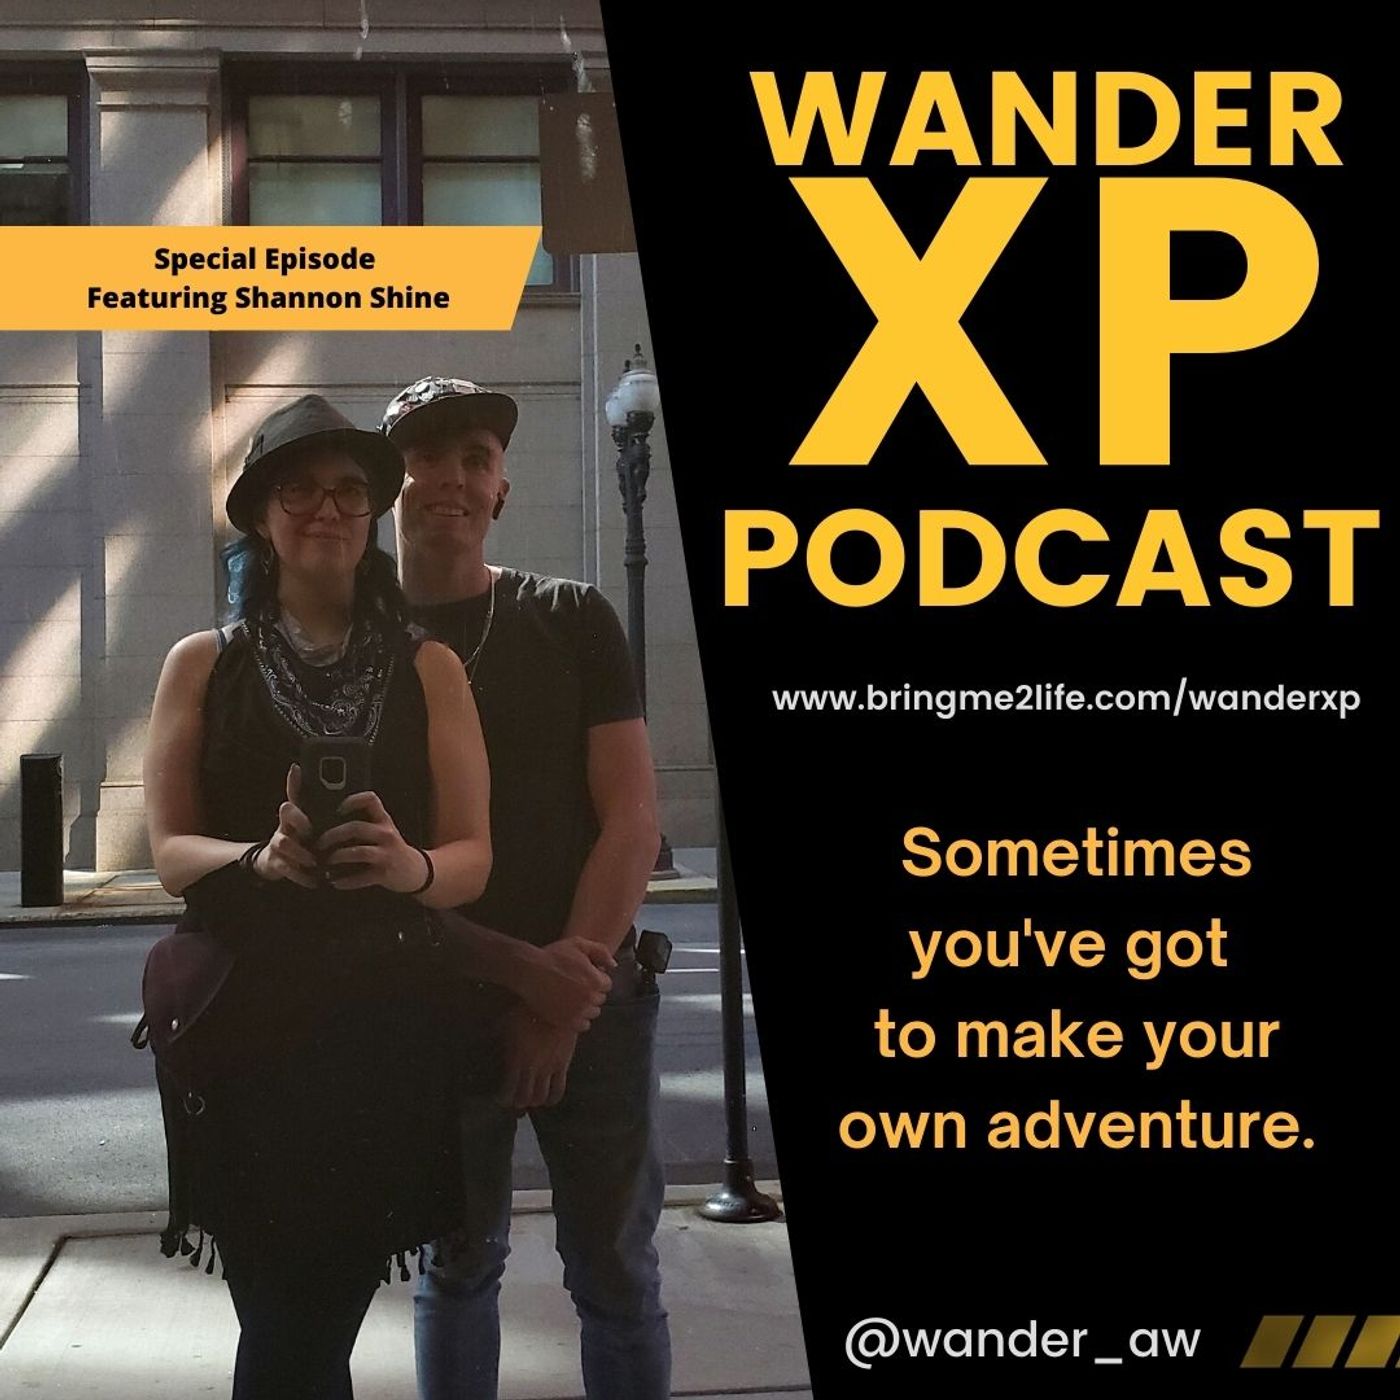 Wander XP - Shannon and Allan check-in with some upcoming goodness